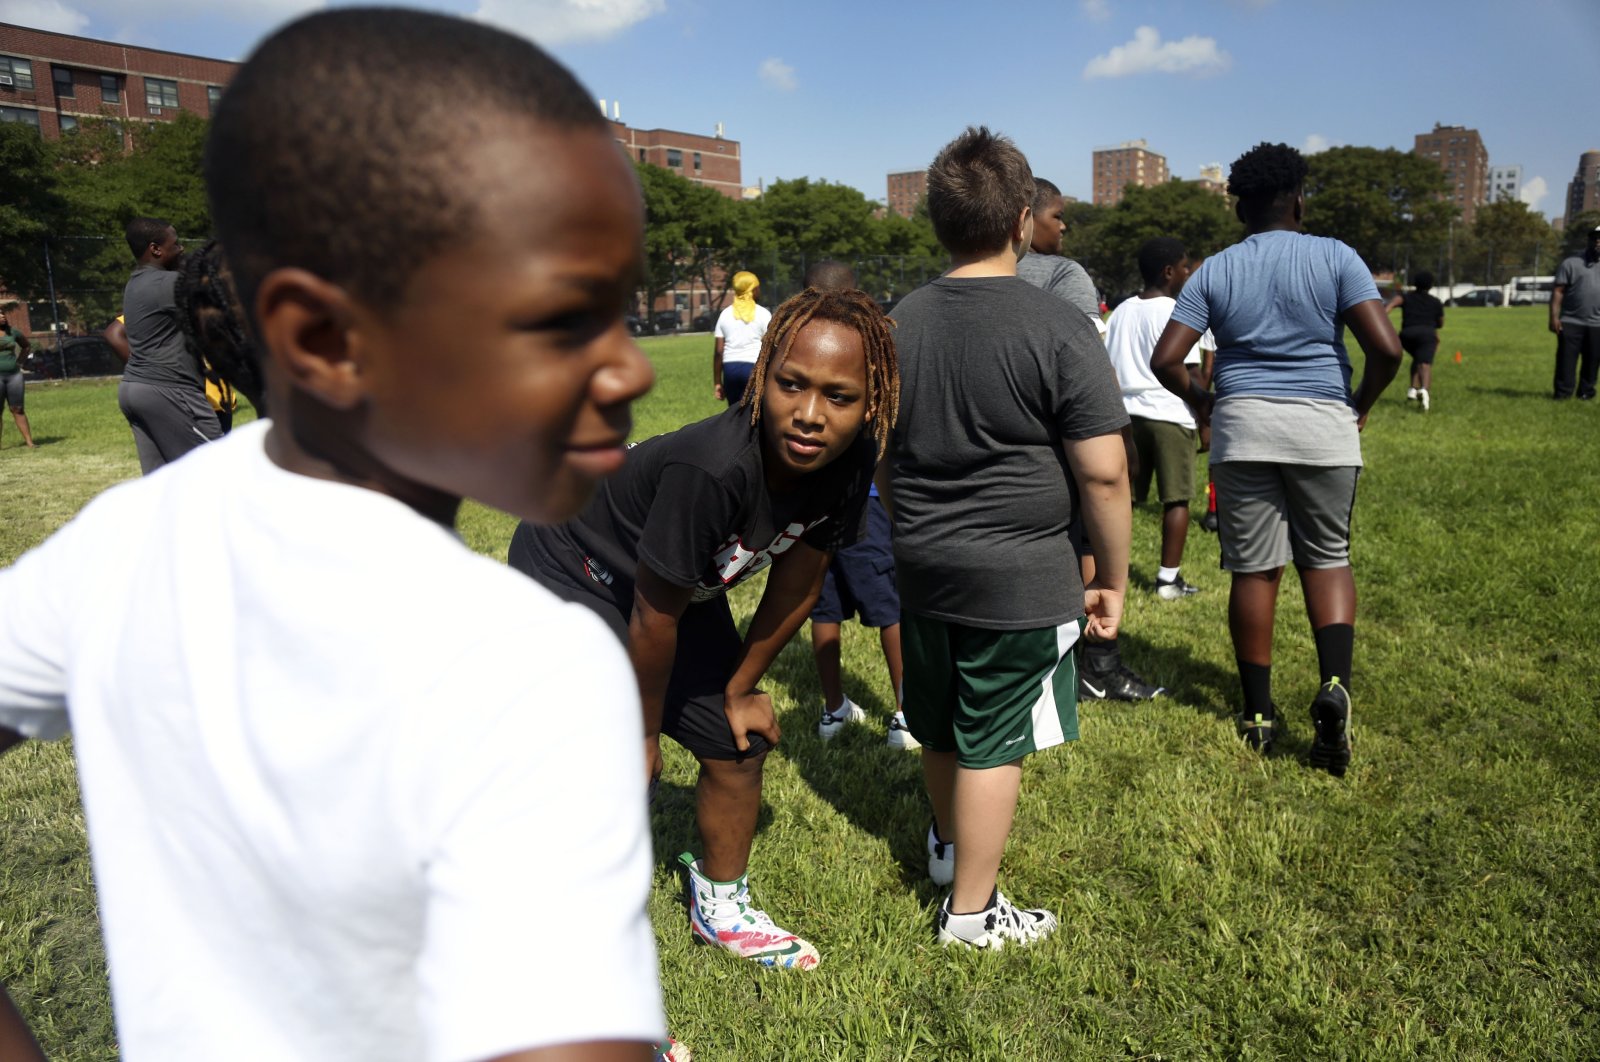 Children warm up with teammates at the first football practice of the season on Sunday, Aug. 9, 2020, in Brooklyn borough of New York. (AP Photo)